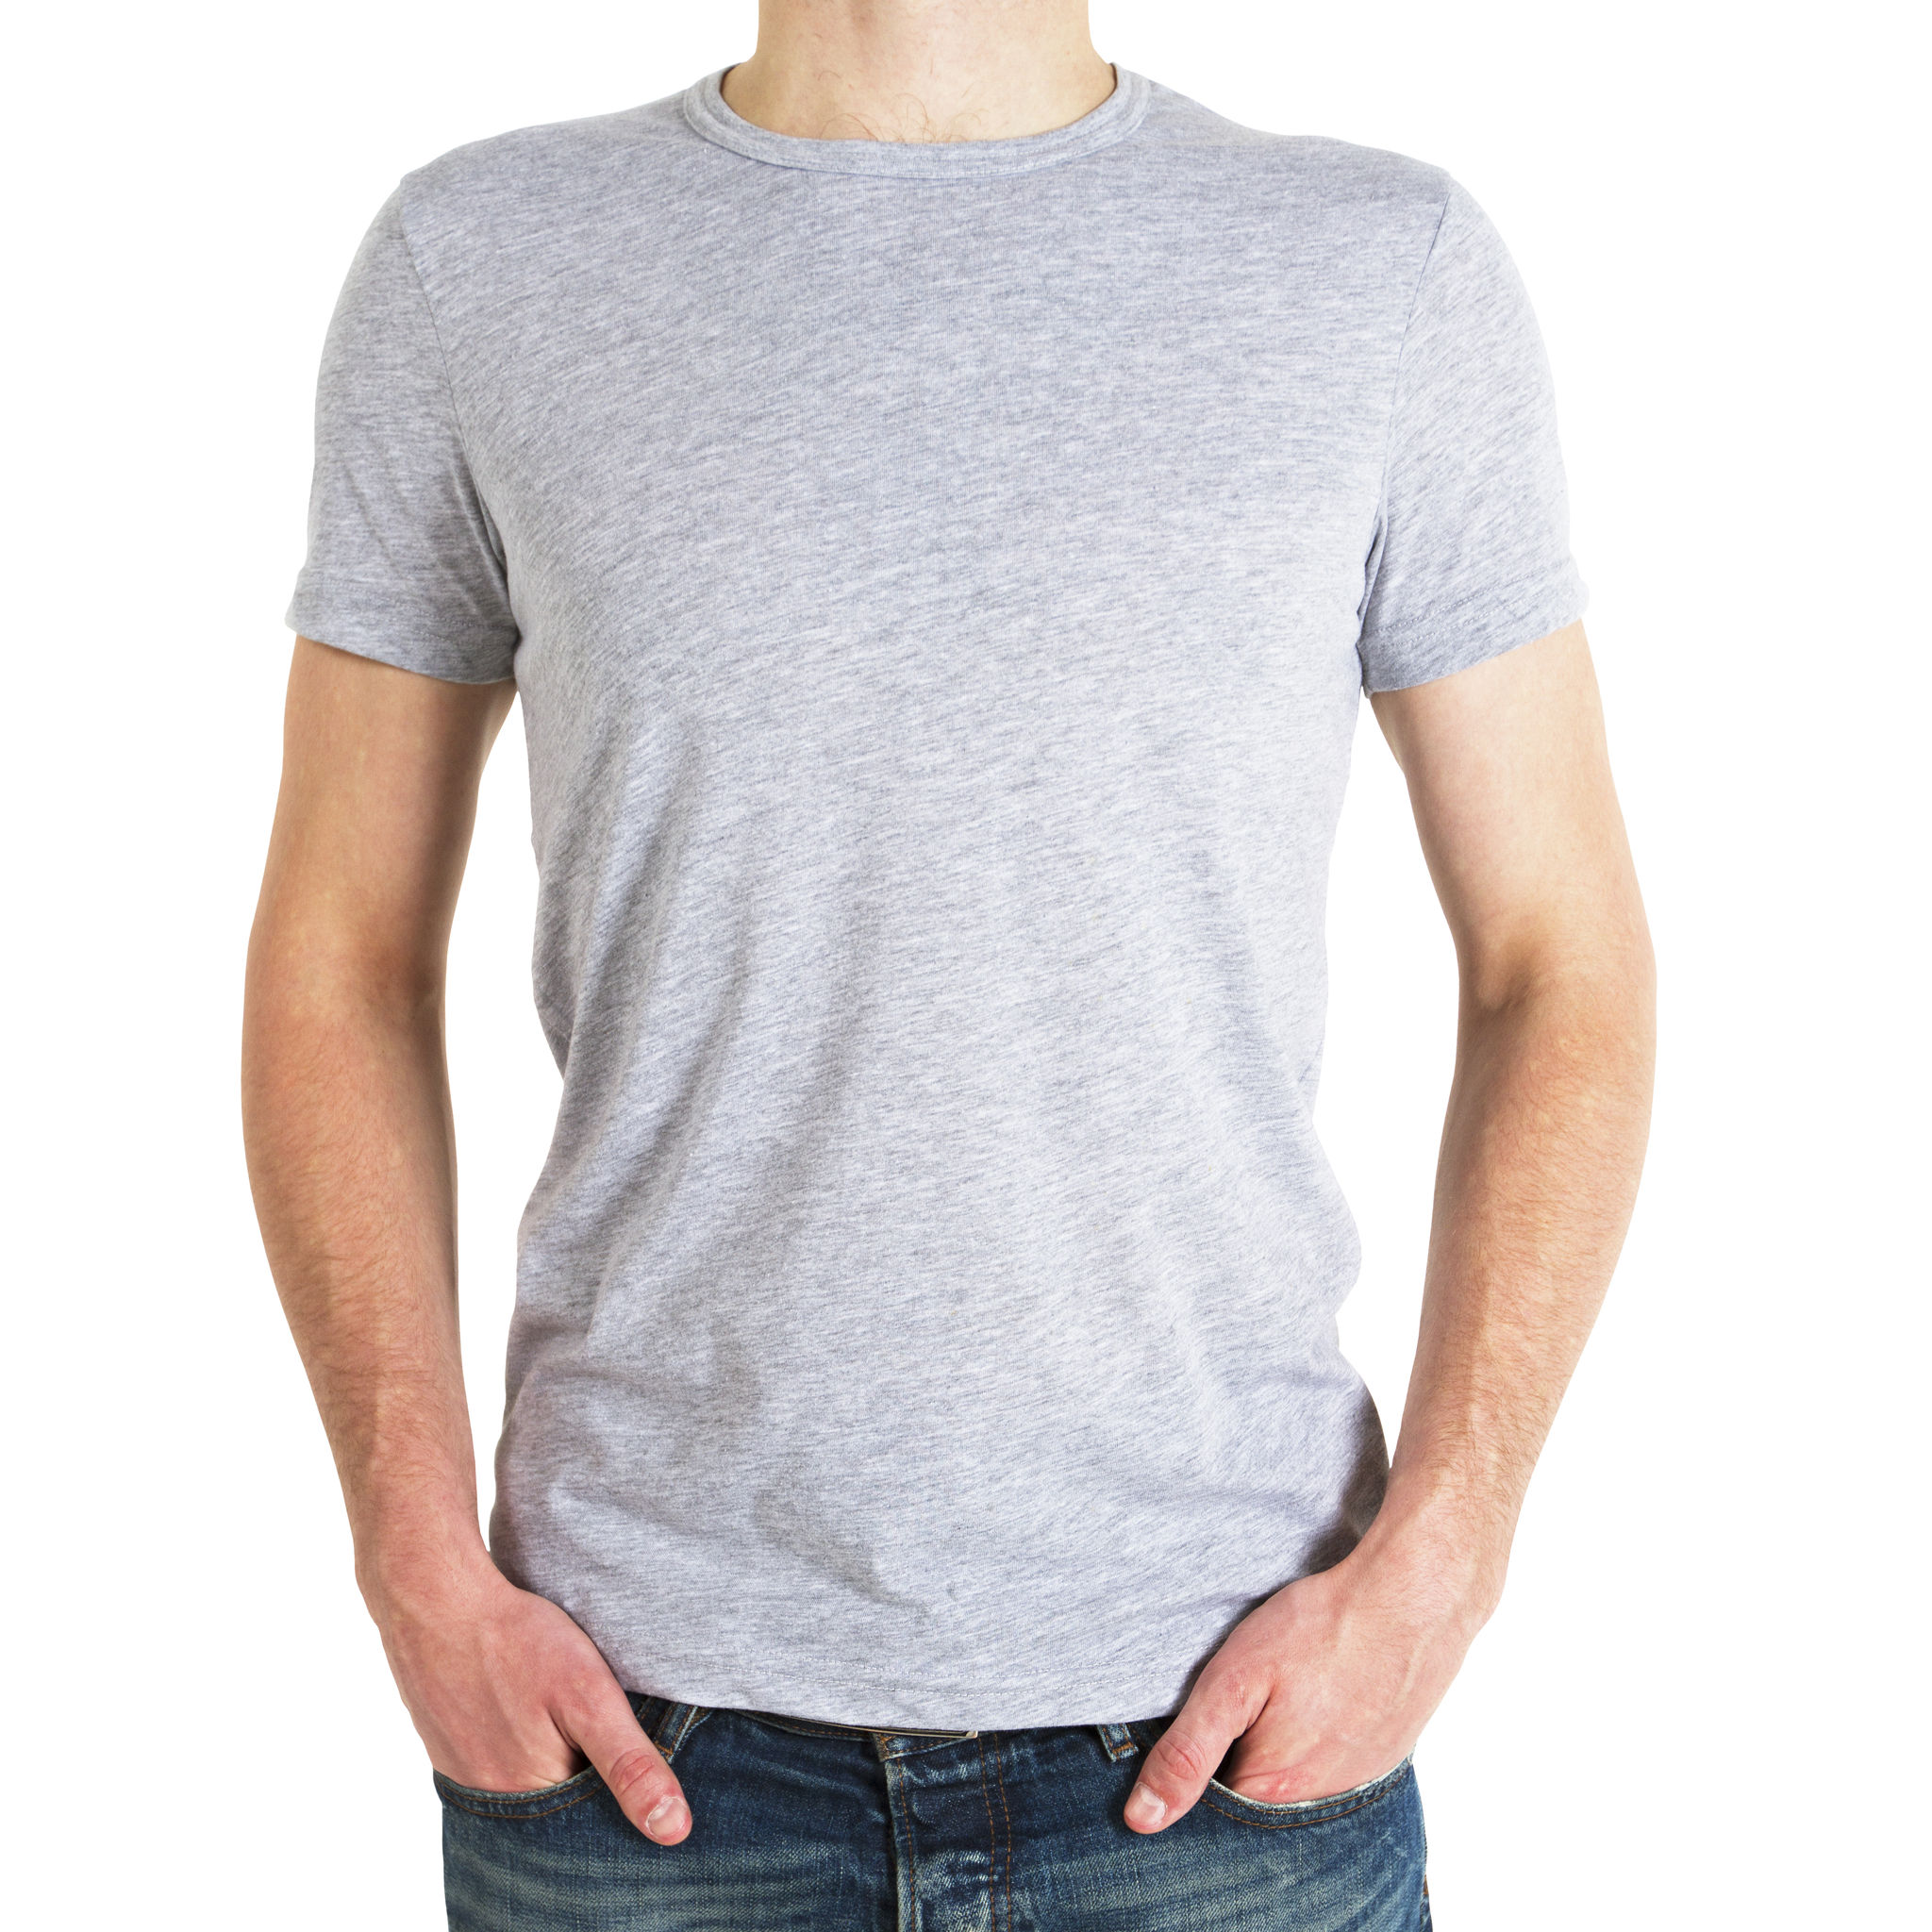 man in gray t-shirt on a white background